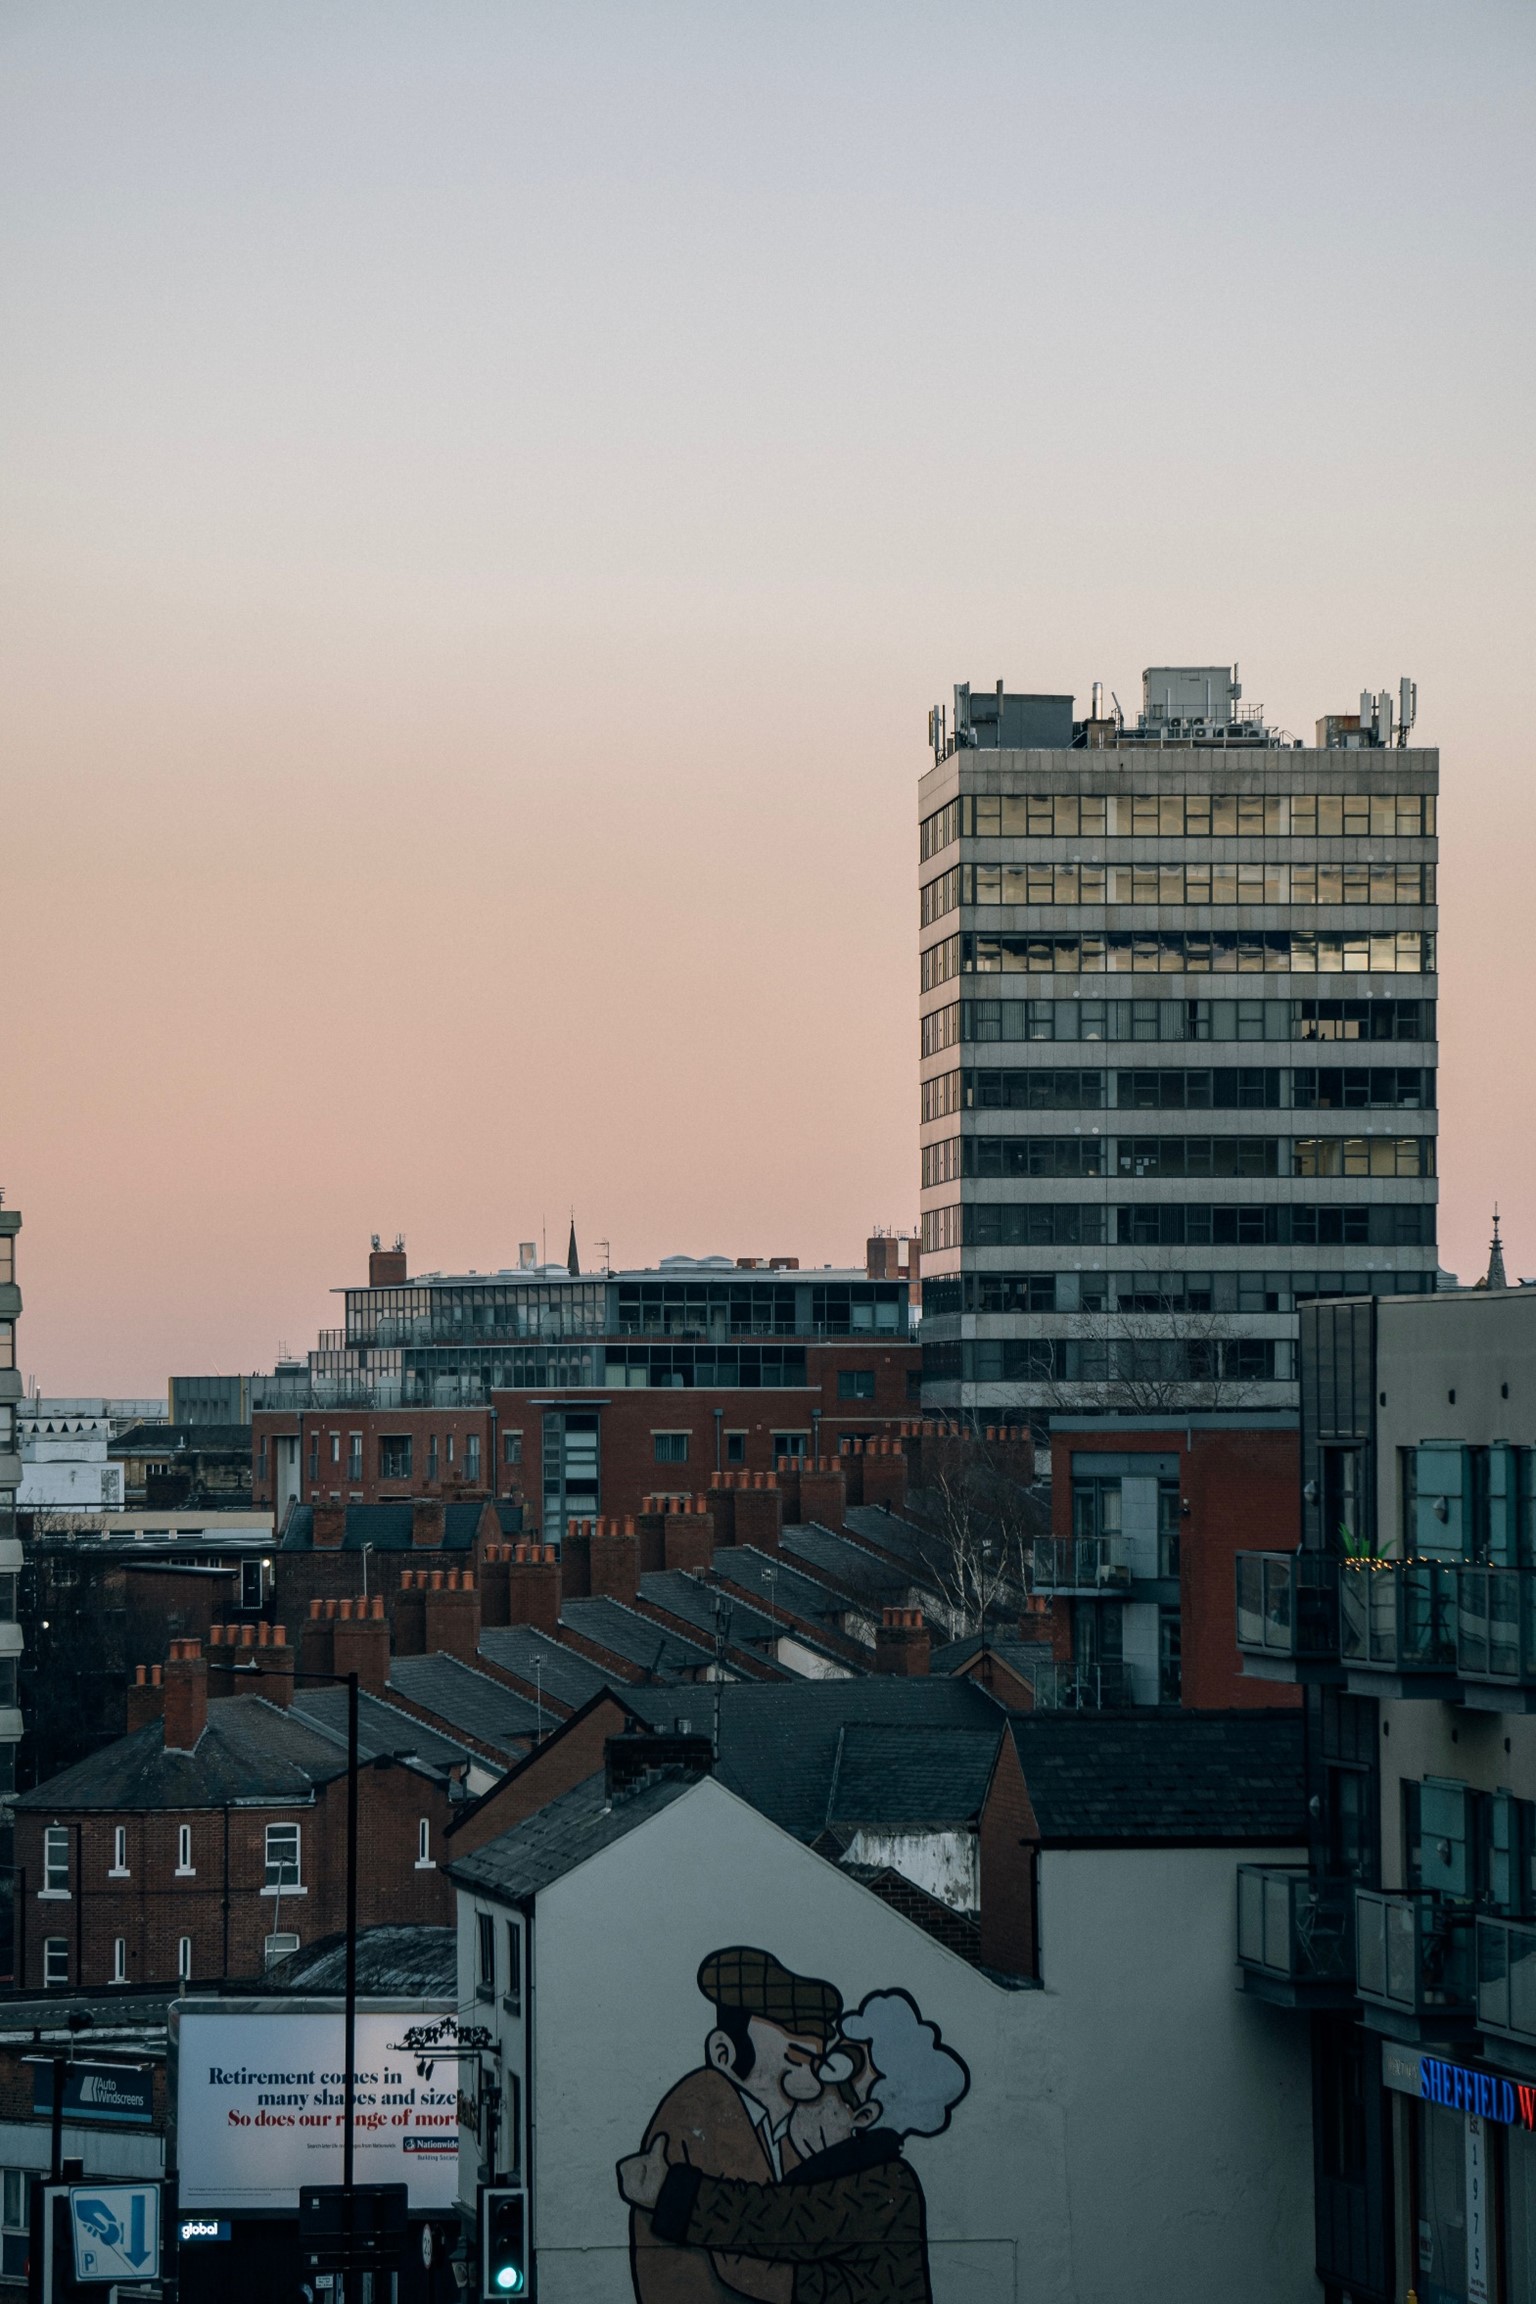 Houses and high-rise building in Sheffield